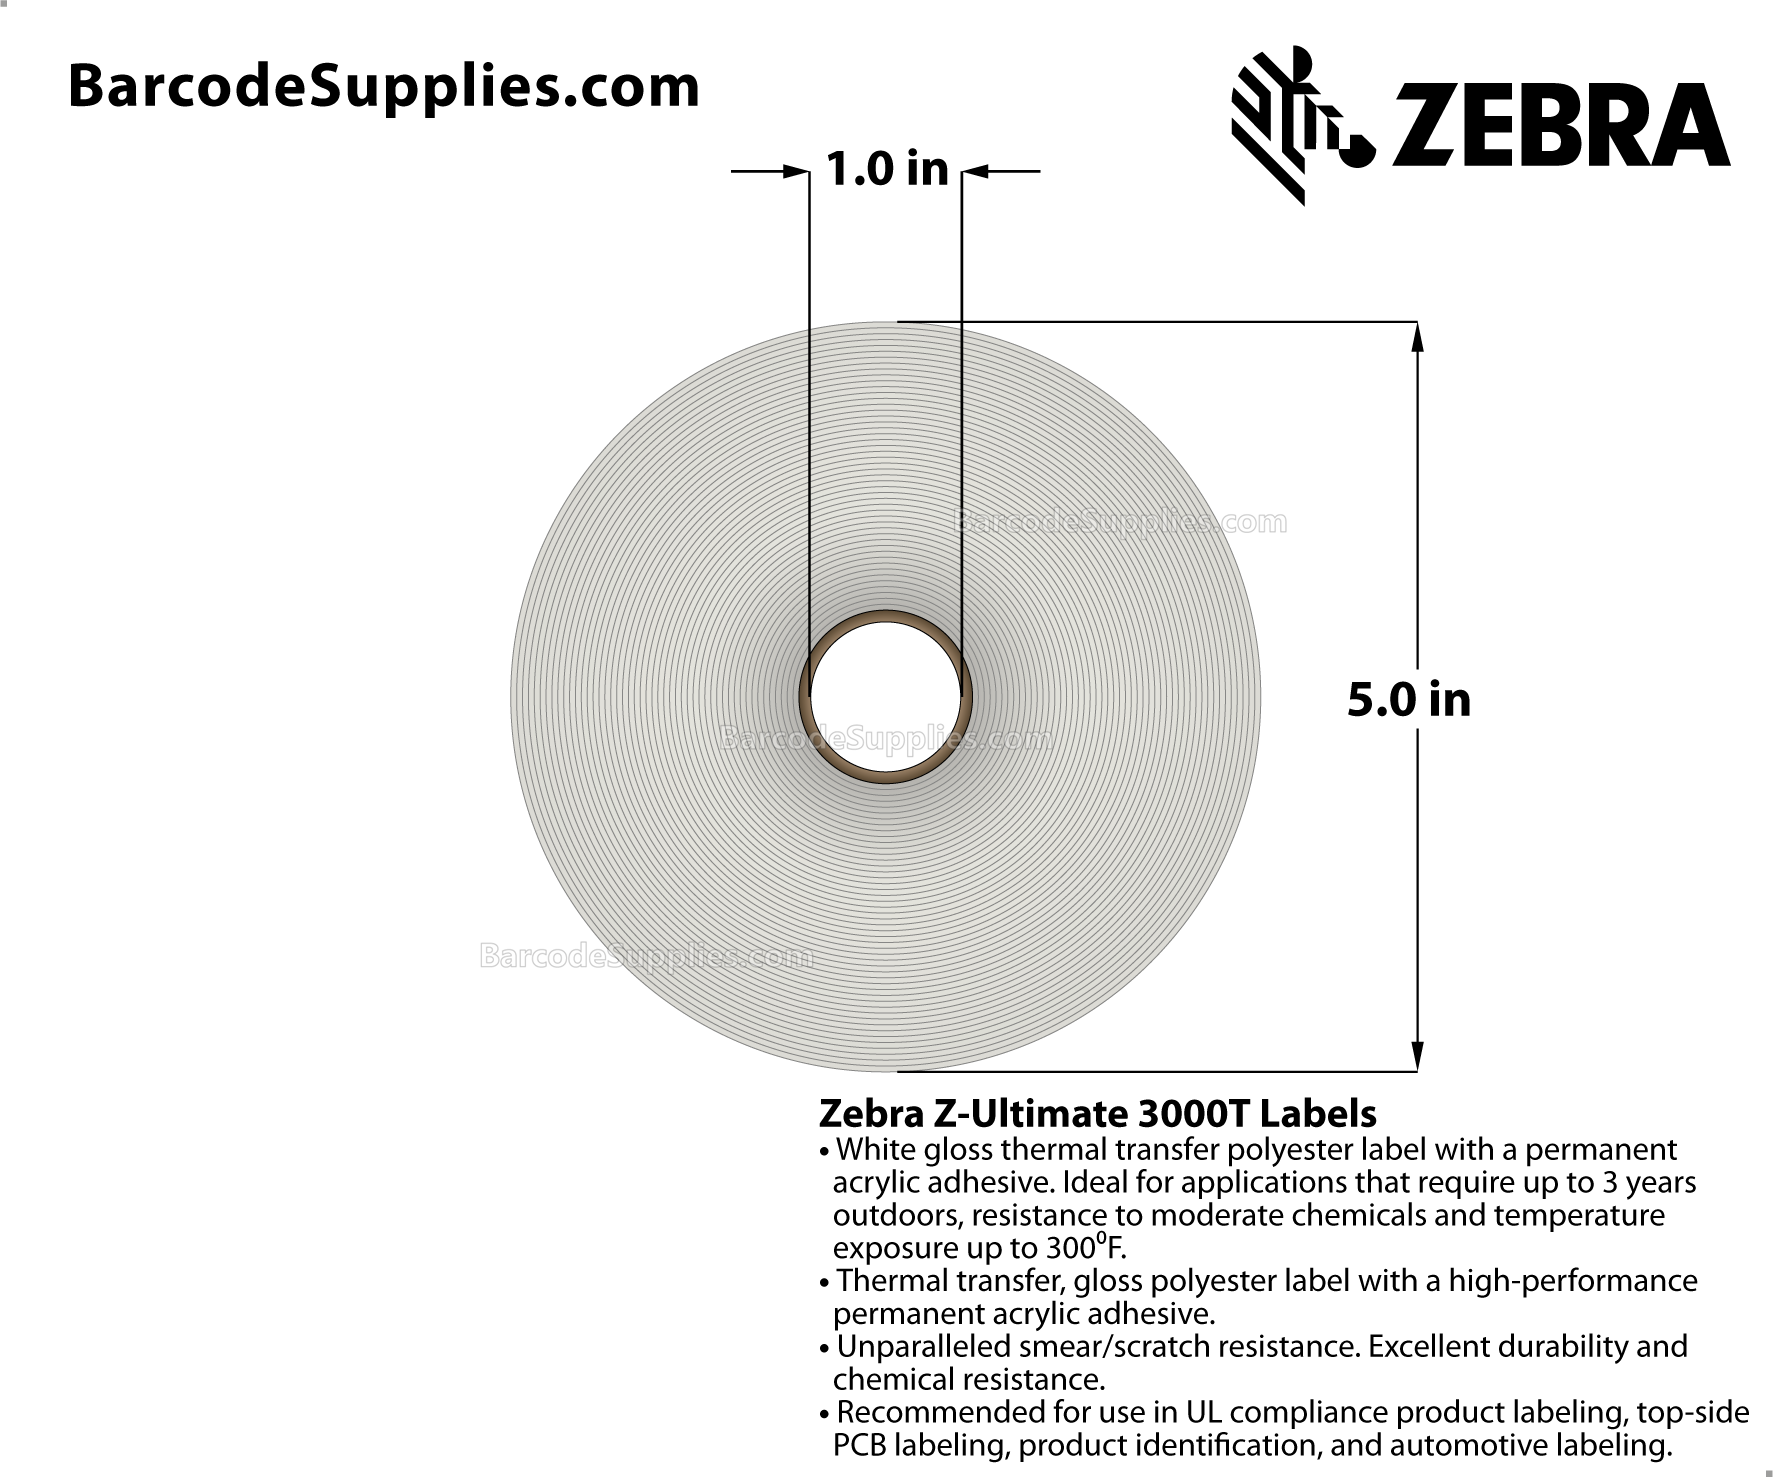 2 x 0.5 Thermal Transfer White Z-Ultimate 3000T Labels With Permanent Adhesive - Perforated - 4550 Labels Per Roll - Carton Of 8 Rolls - 36400 Labels Total - MPN: 18943